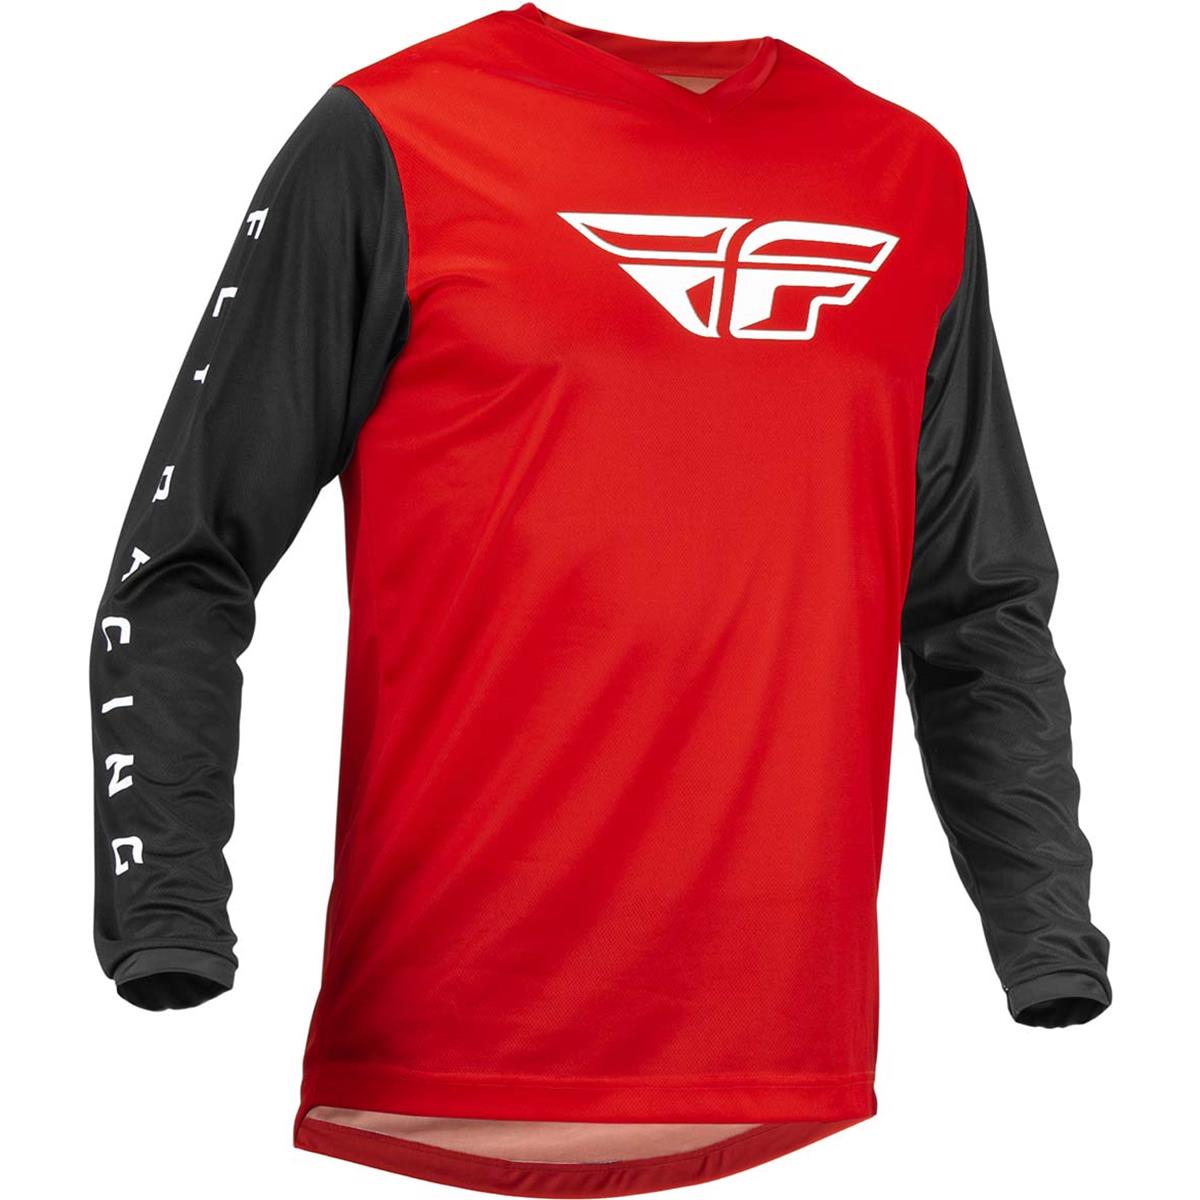 Fly Racing Maillot MX F-16 Rouge/Noir